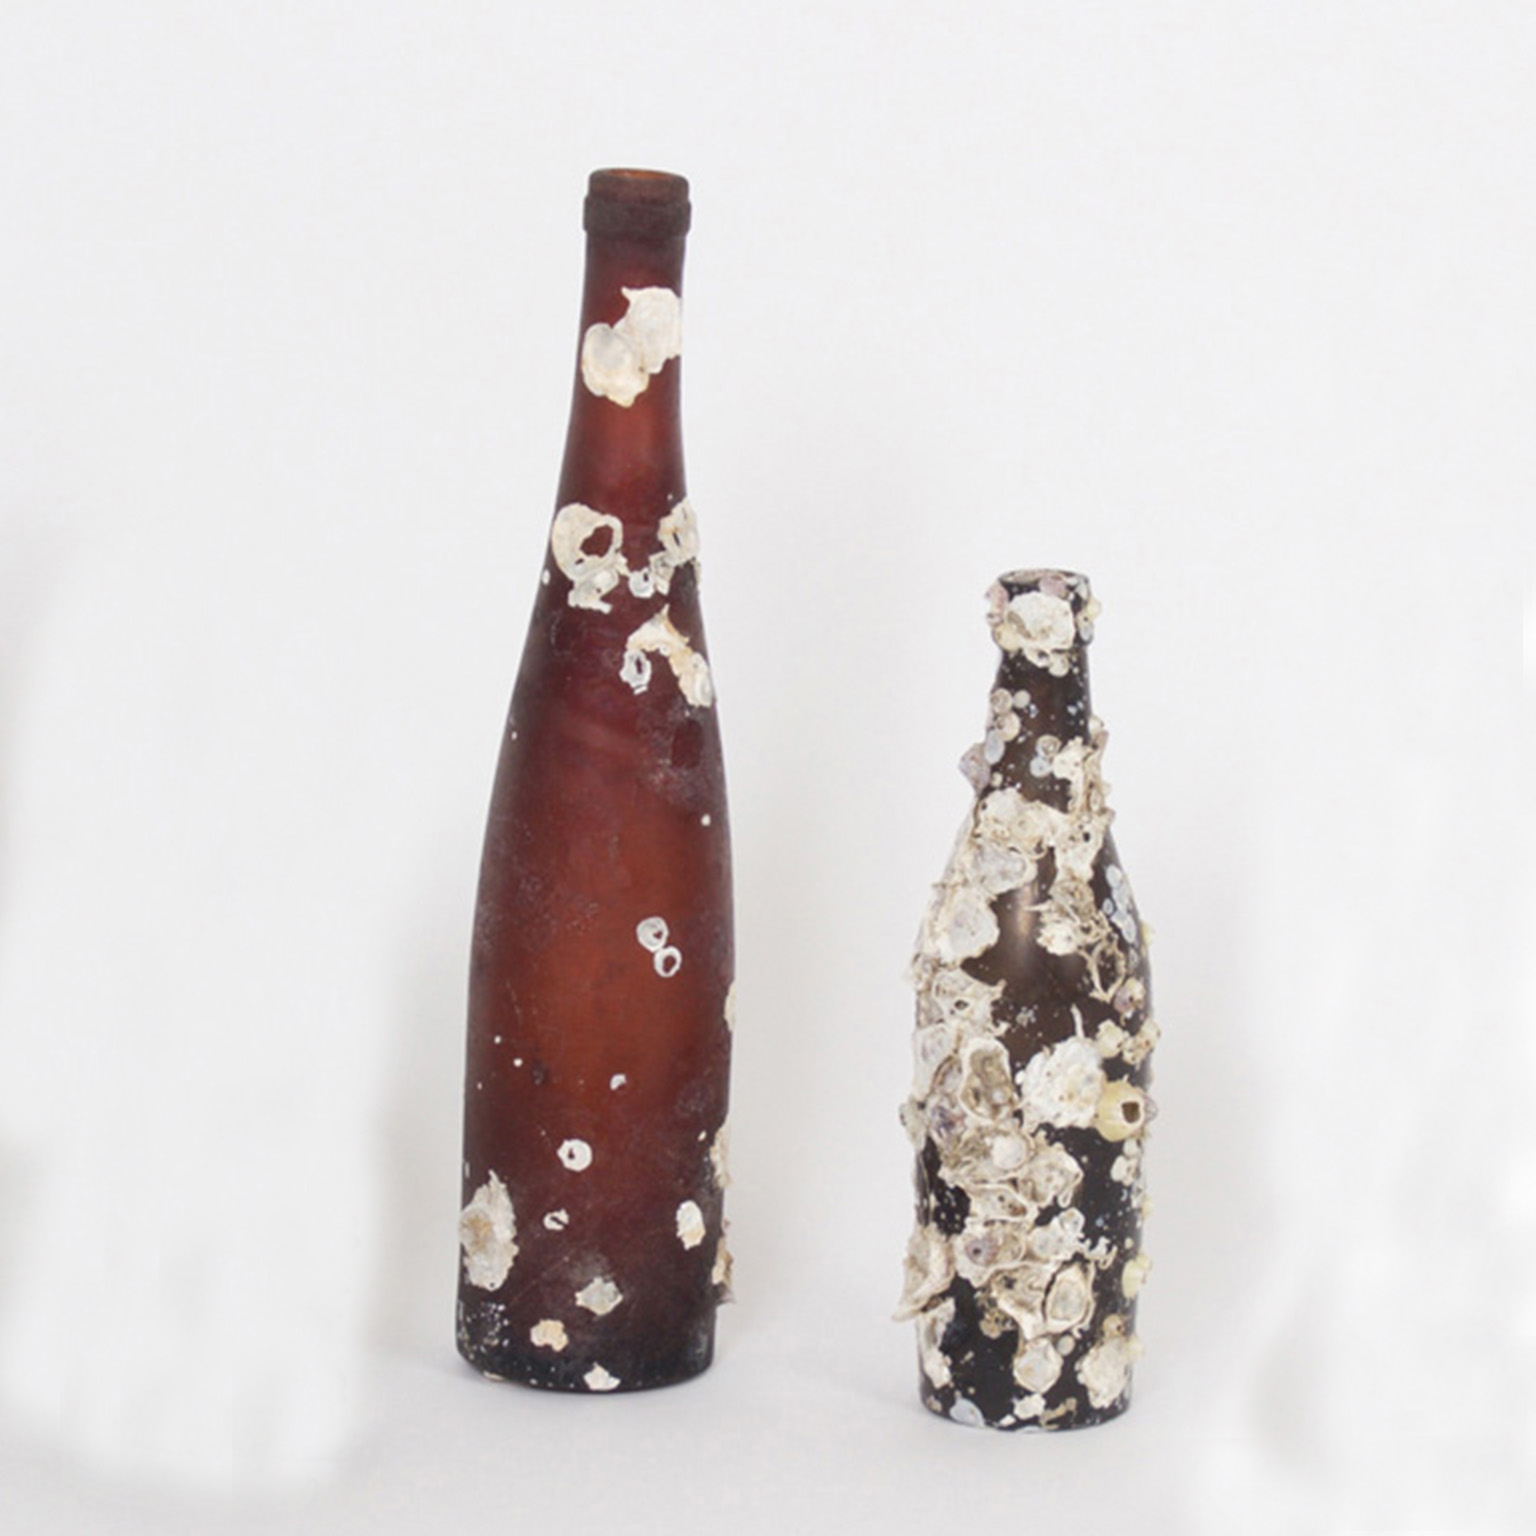 Two Barnacle Encrusted Vintage Bottles, Priced Individually